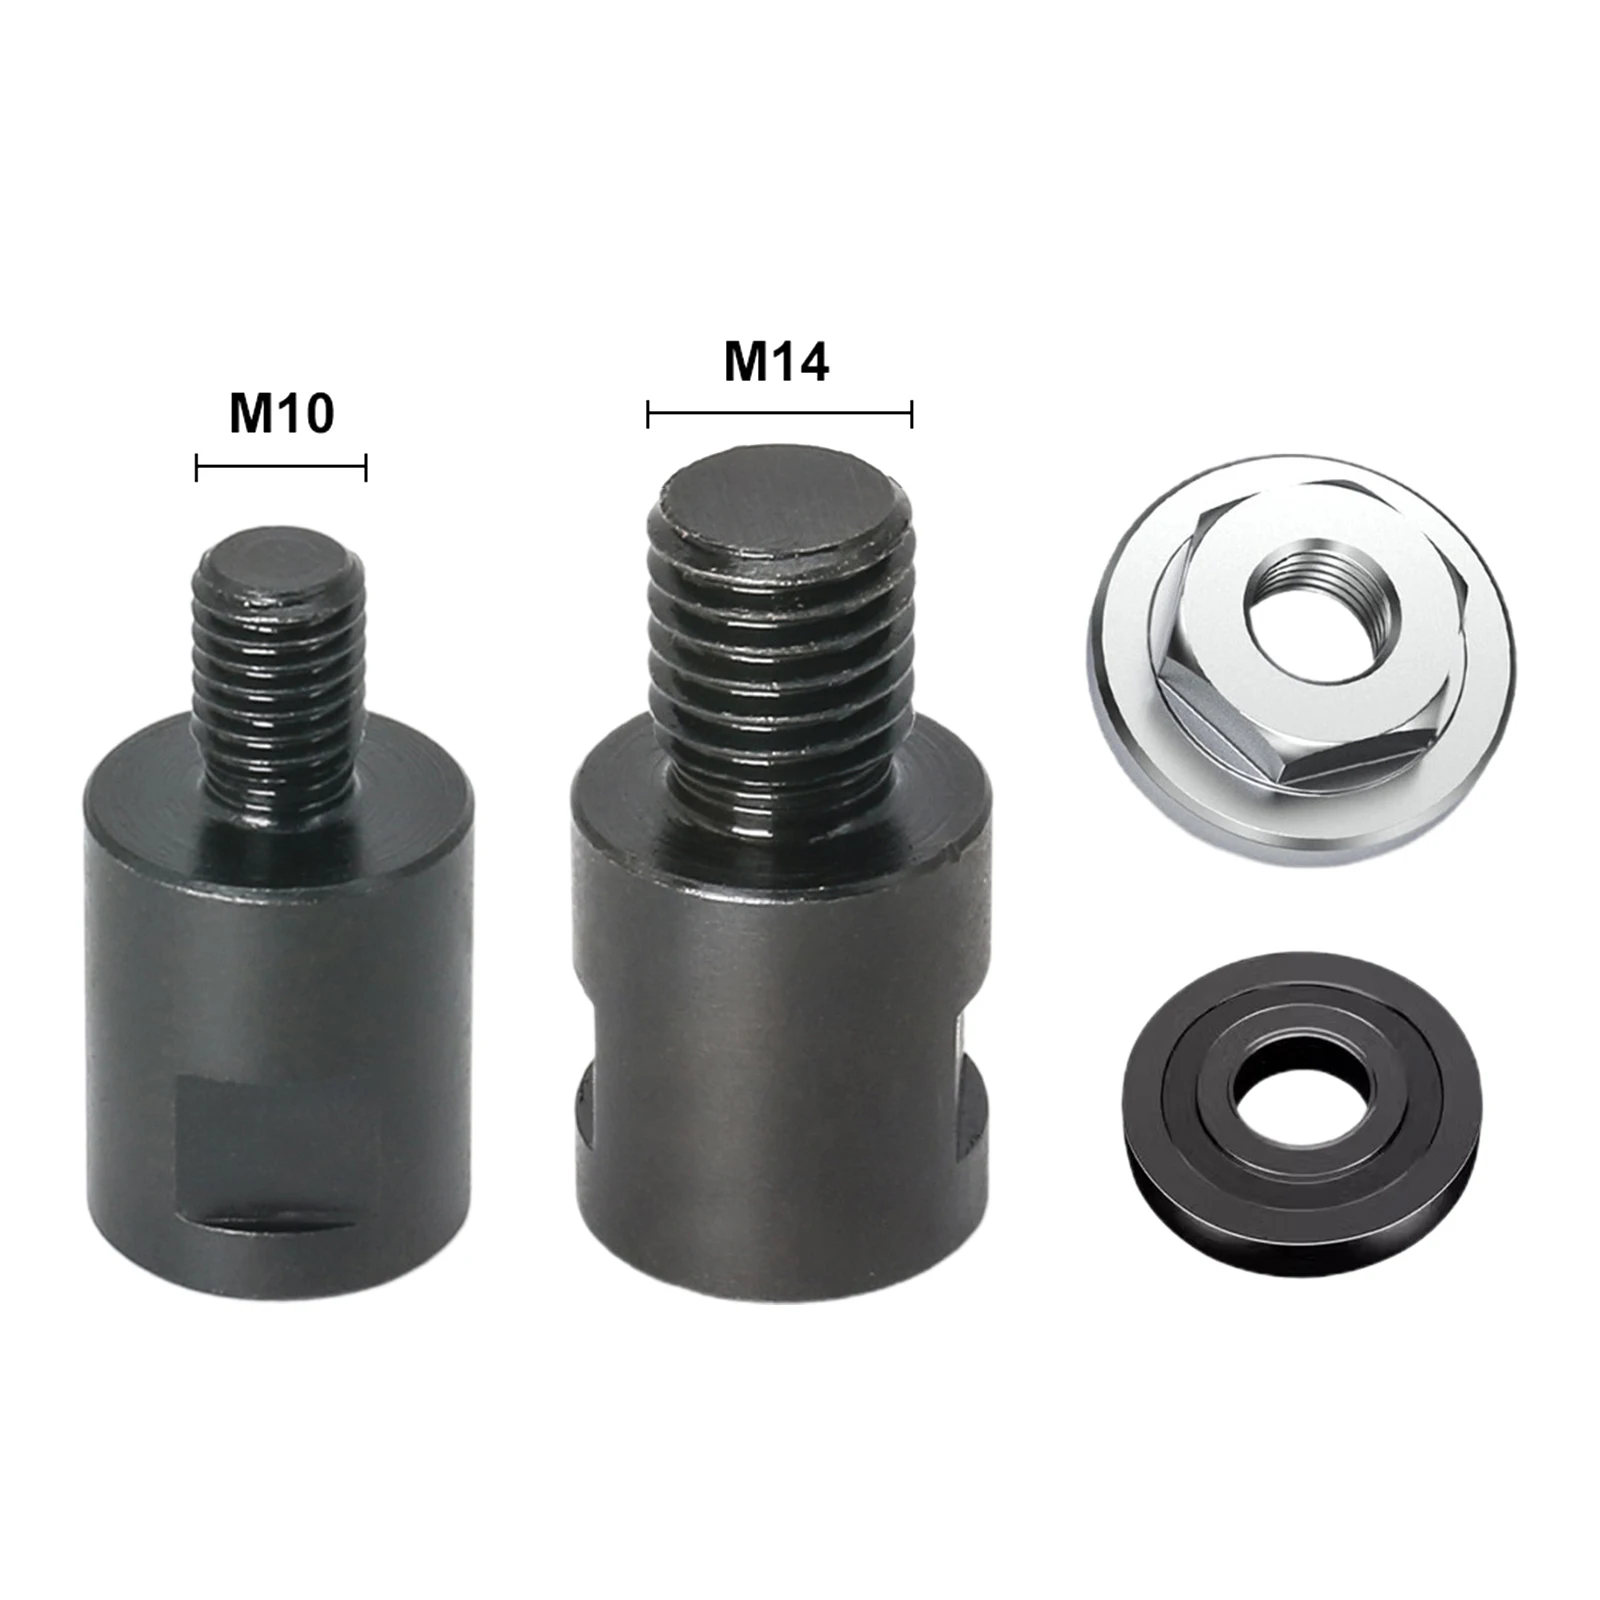 M14 M1 Grinder Adapter Converter And Platen Set Angle Grinder  Accessories Connector Screw Nuts Slotting Different Thread novastar cvt310 fiber converter led controller system accessories 100 240 v 50 60 hz connect the sending card to led display